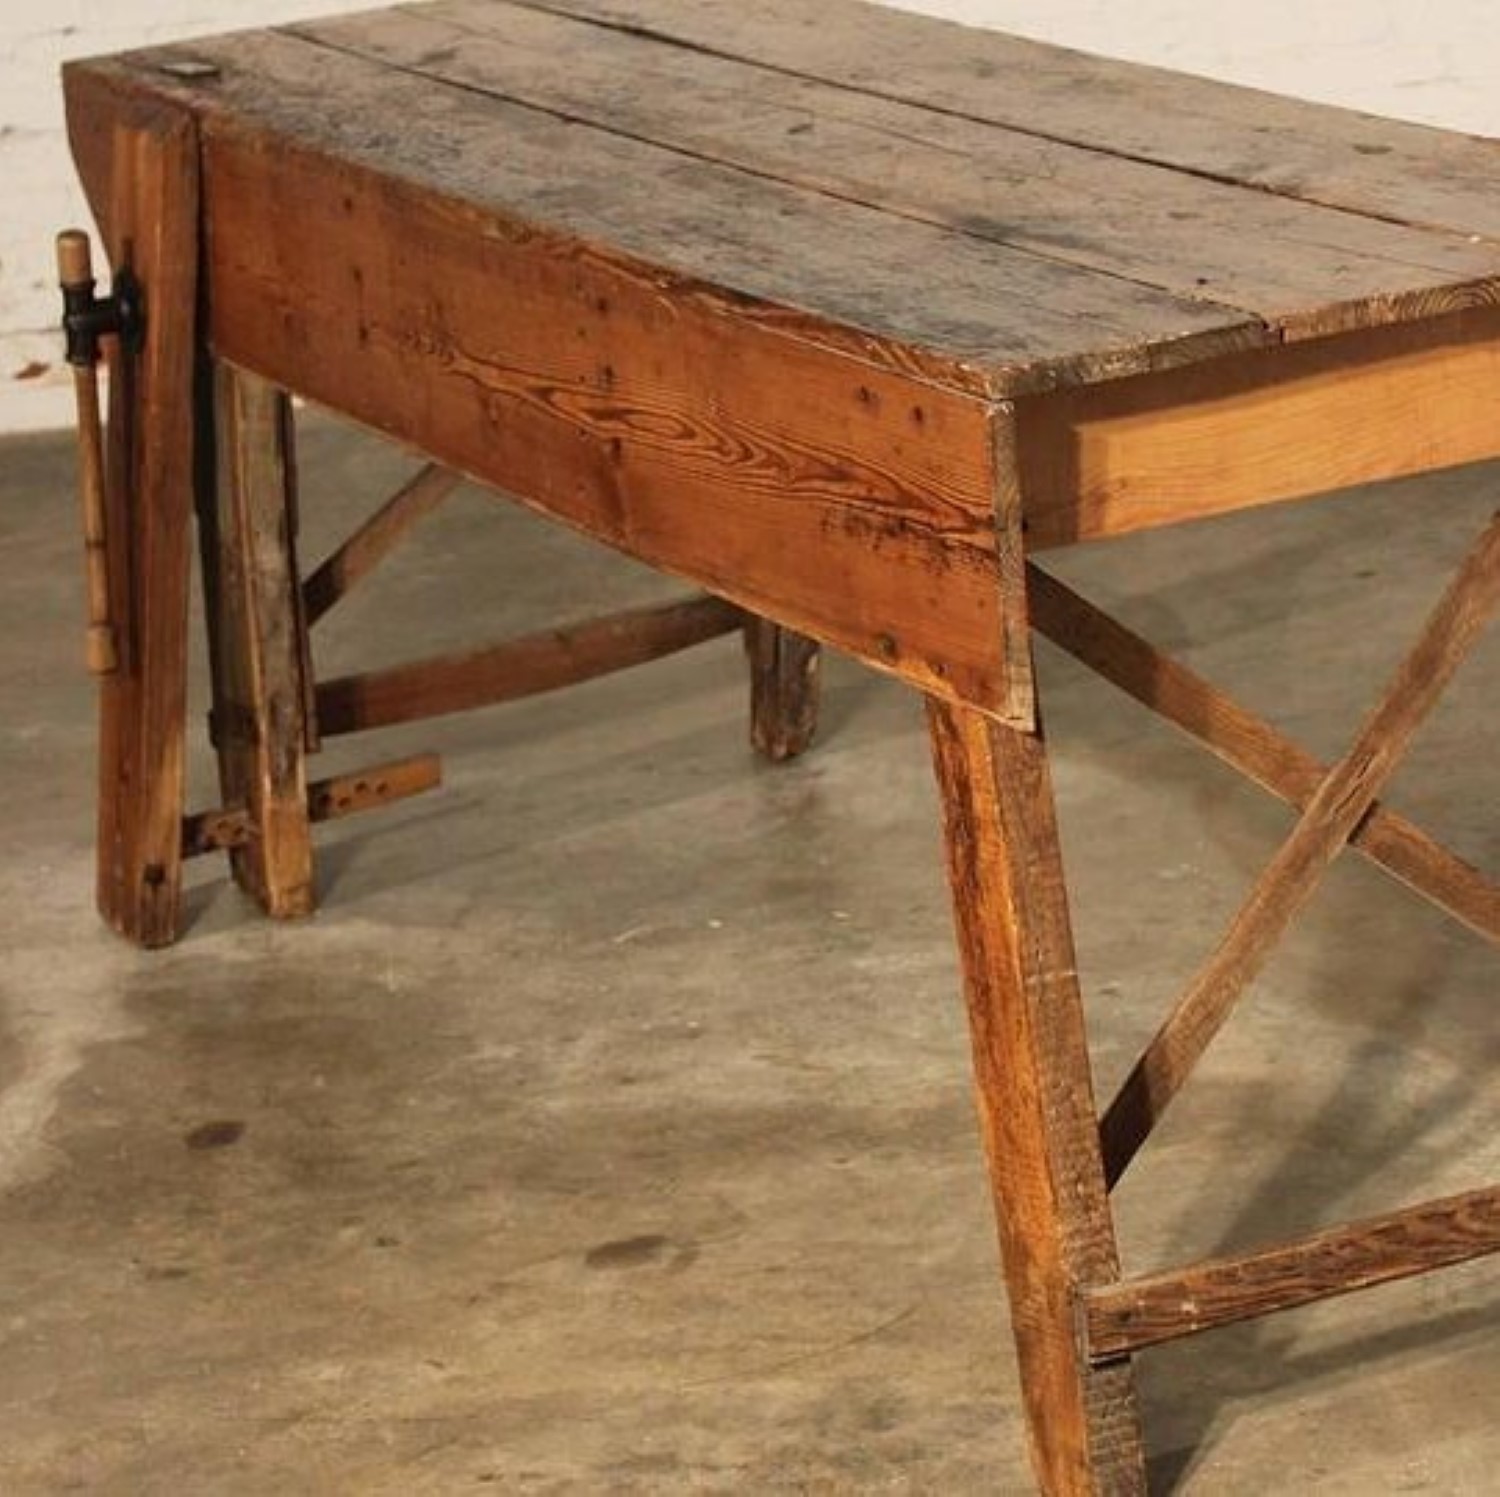 Primitive Industrial Farmhouse Style Dining Table Workbench with Wood Vise Leg